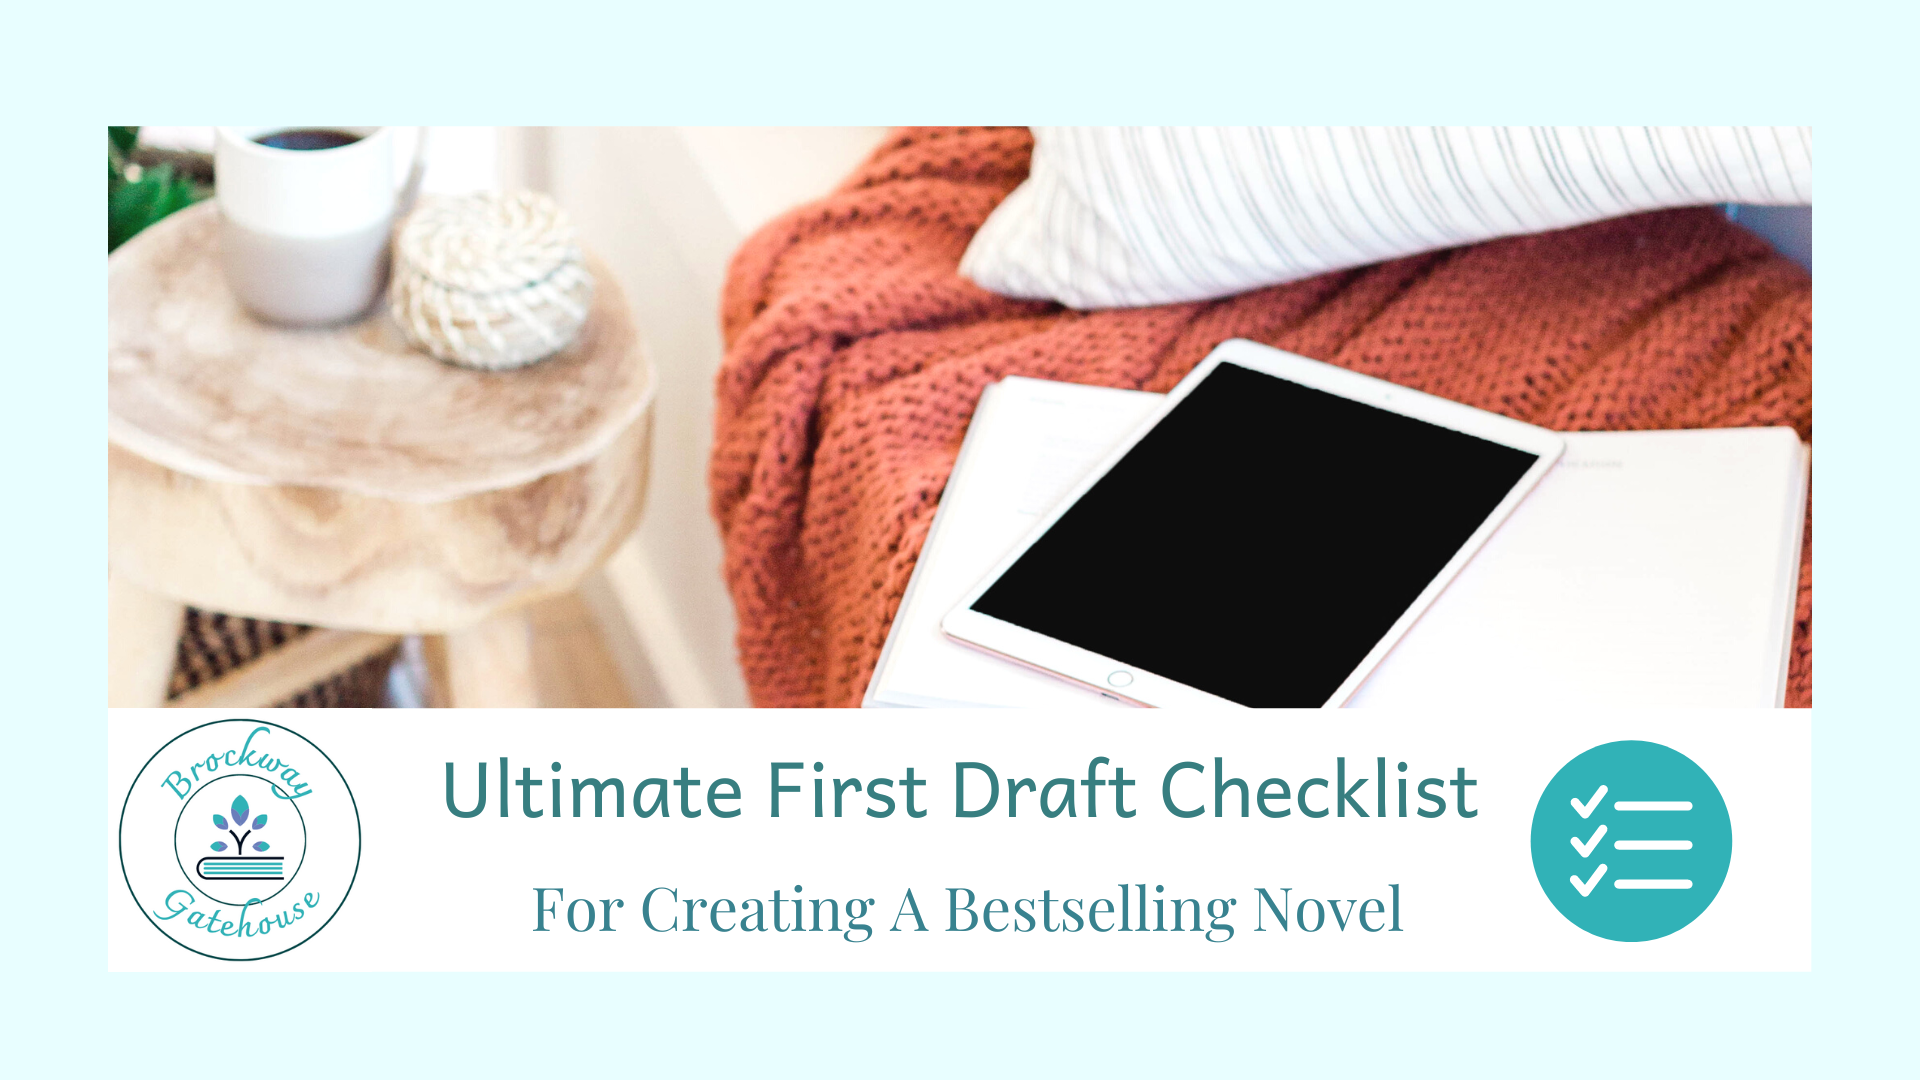 Ultimate First Draft Checklist - Lead Magnet